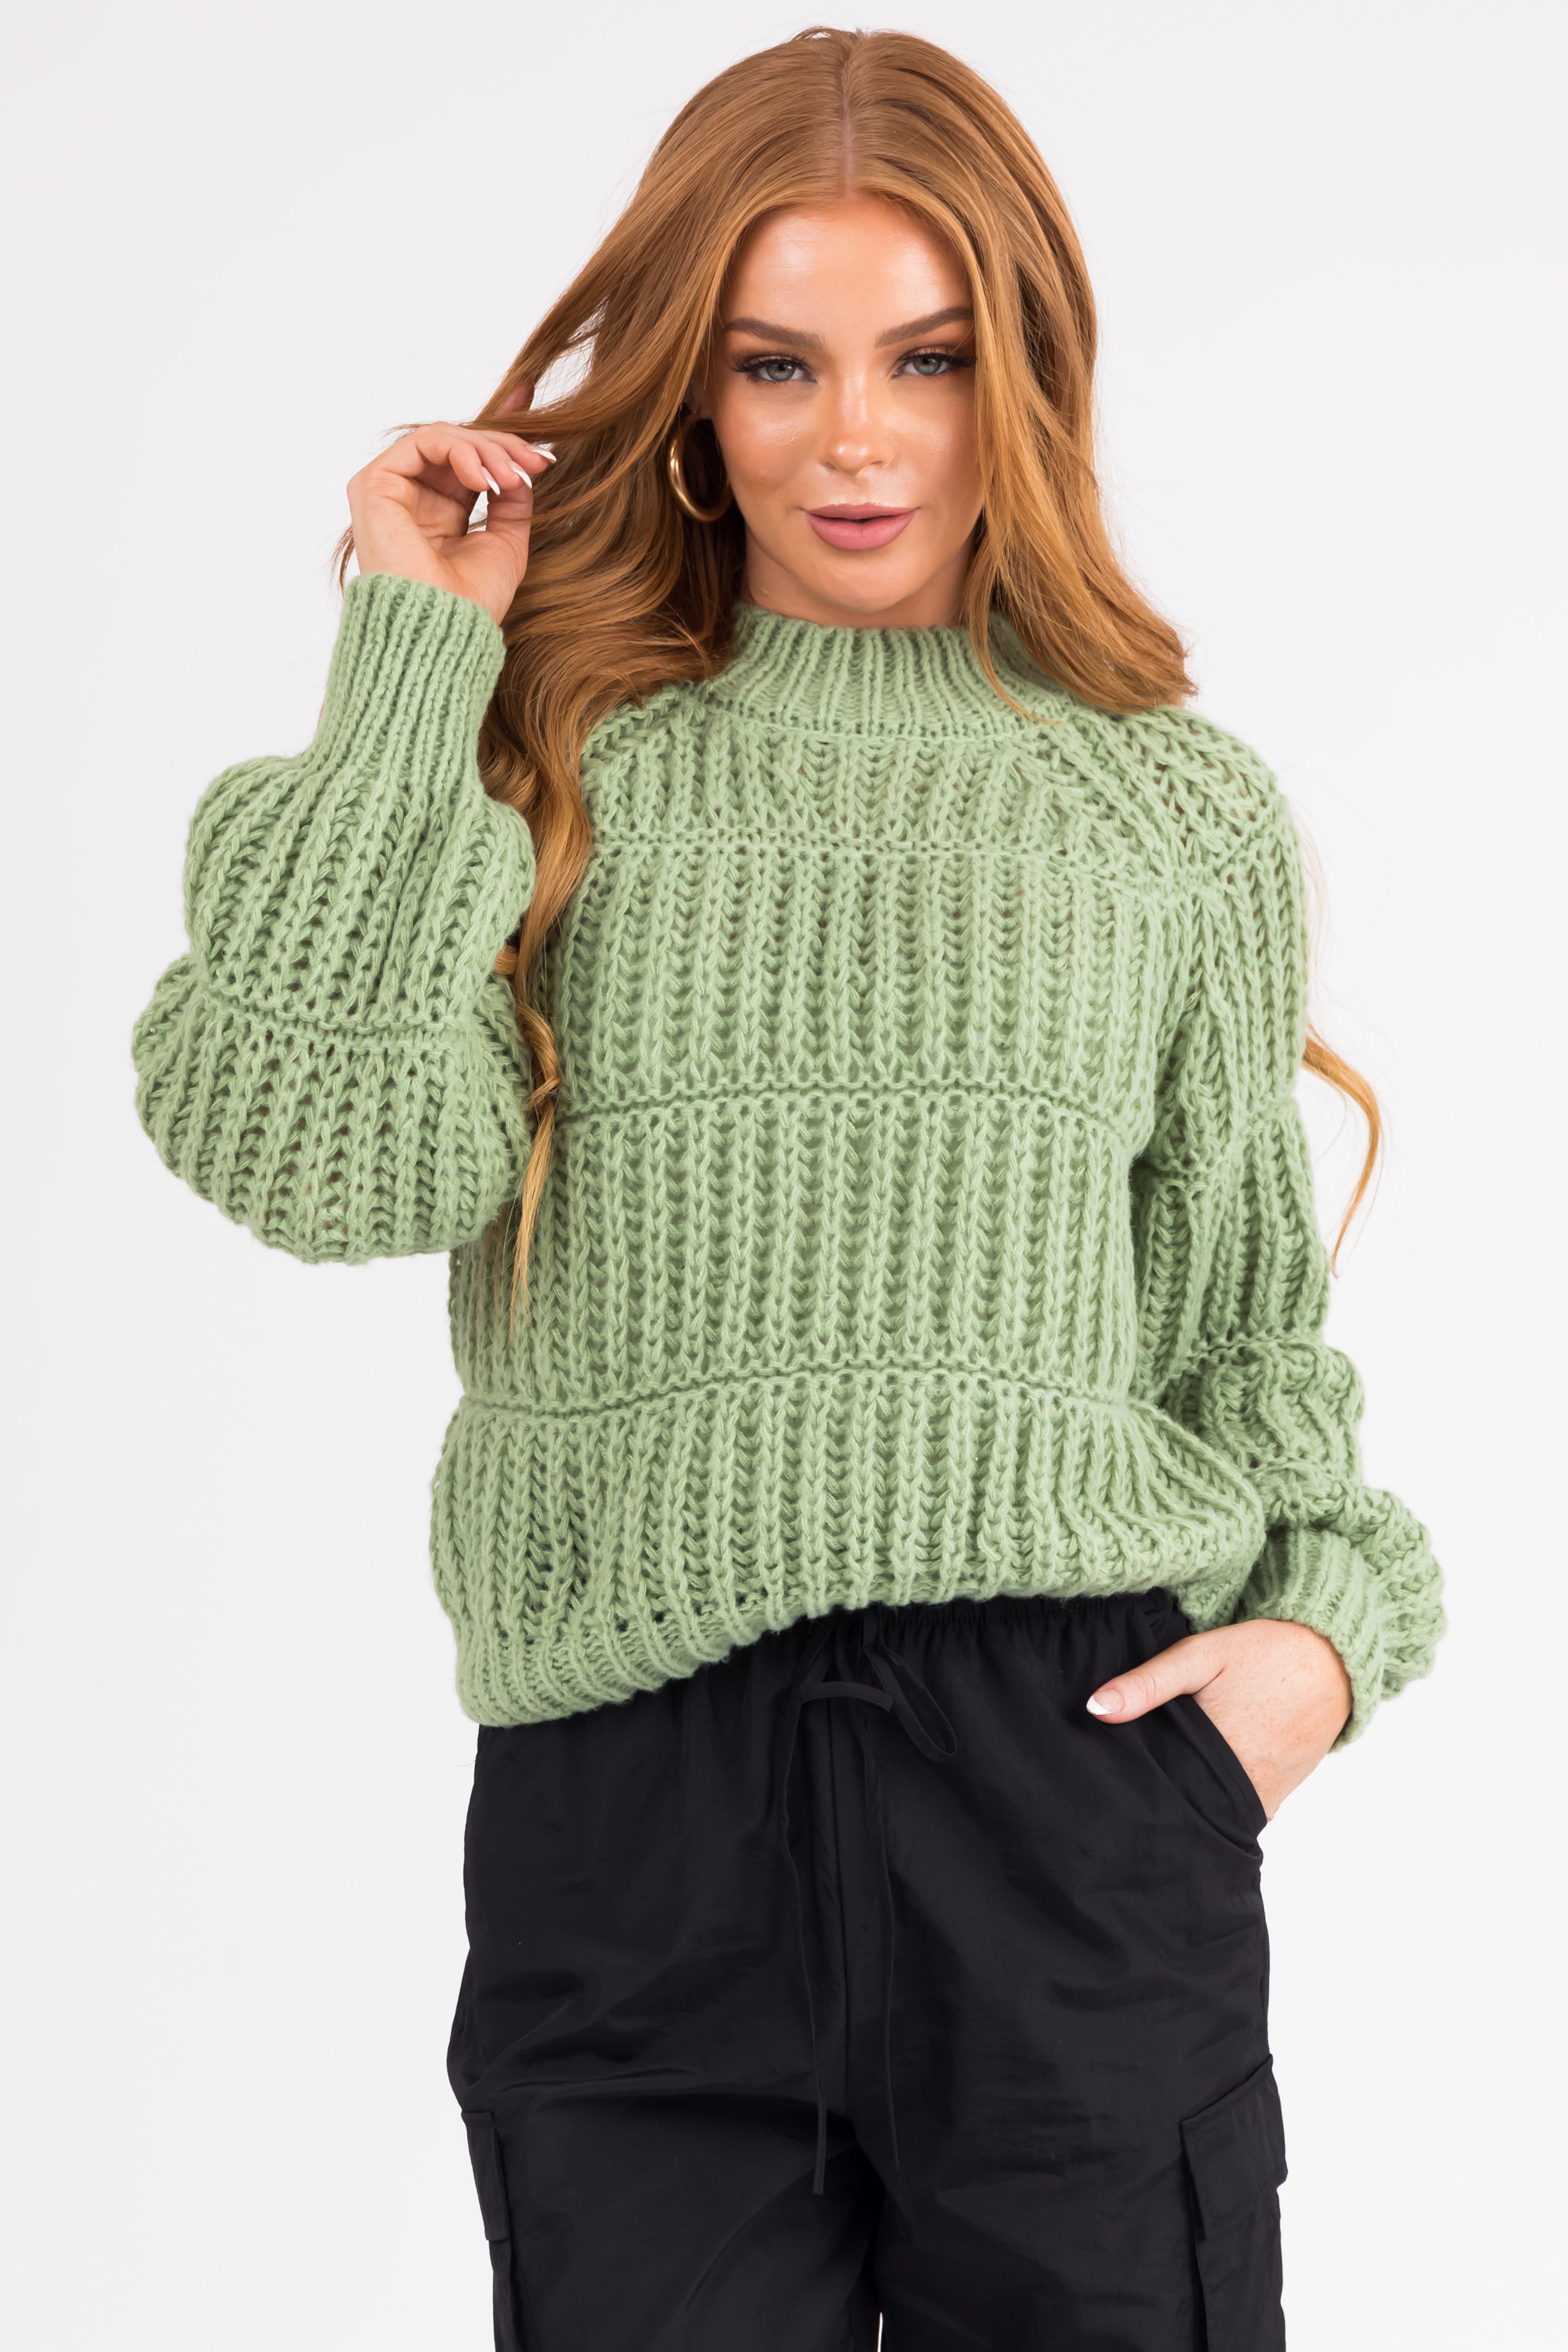 Pistachio Thick Crochet Knit Tiered Sweater | Lime Lush